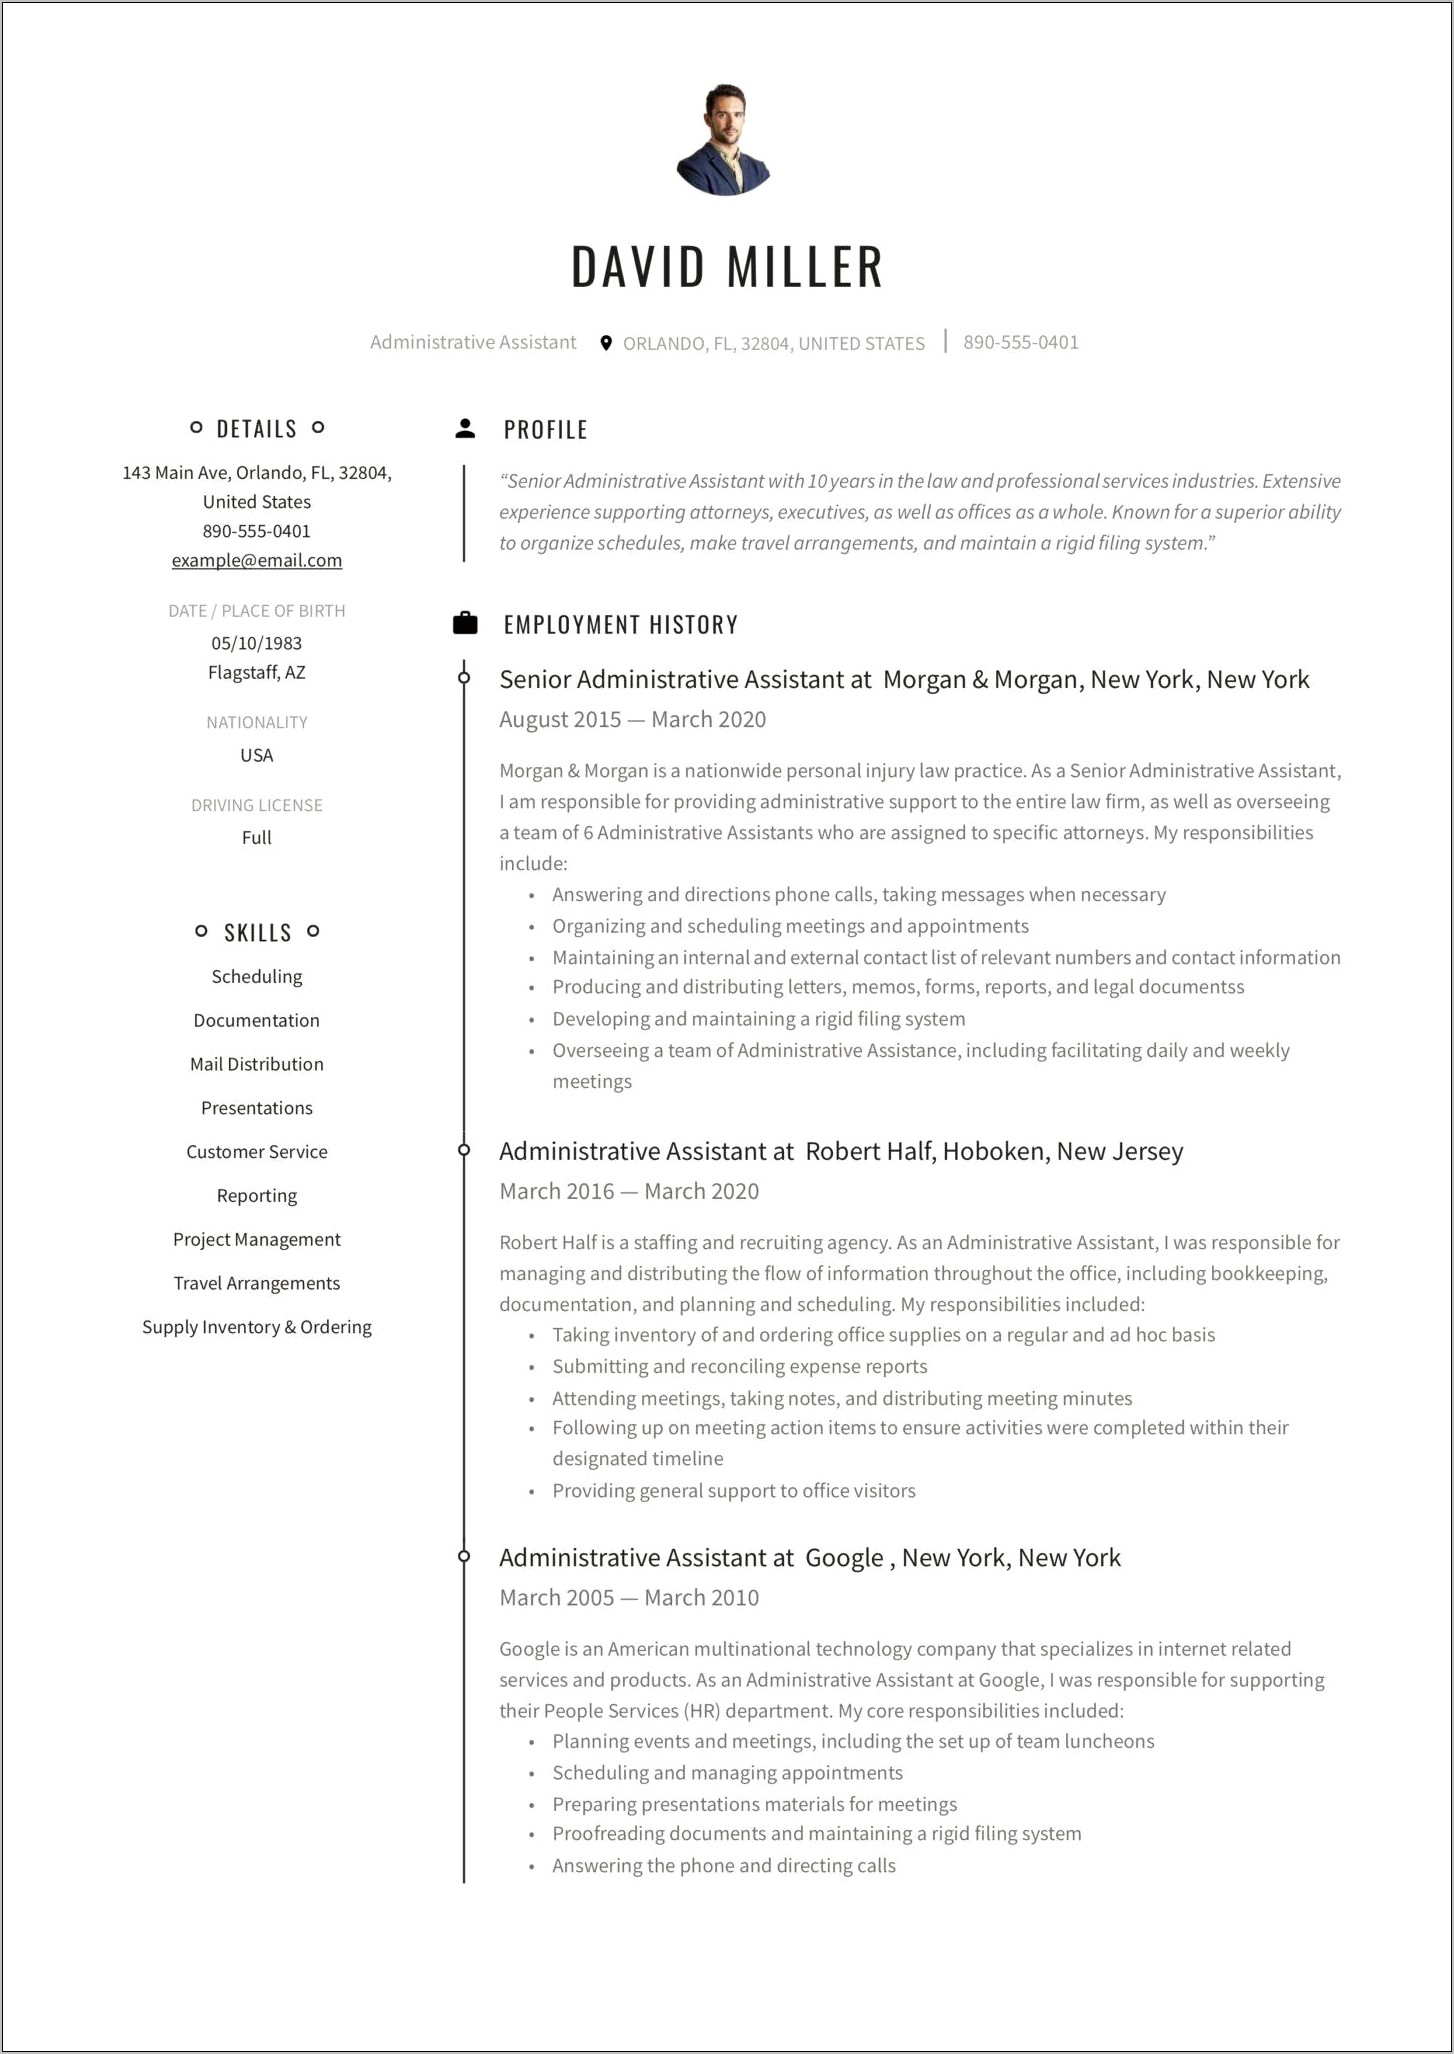 Resume Personal Profile Statement Examples Administrative Assistant